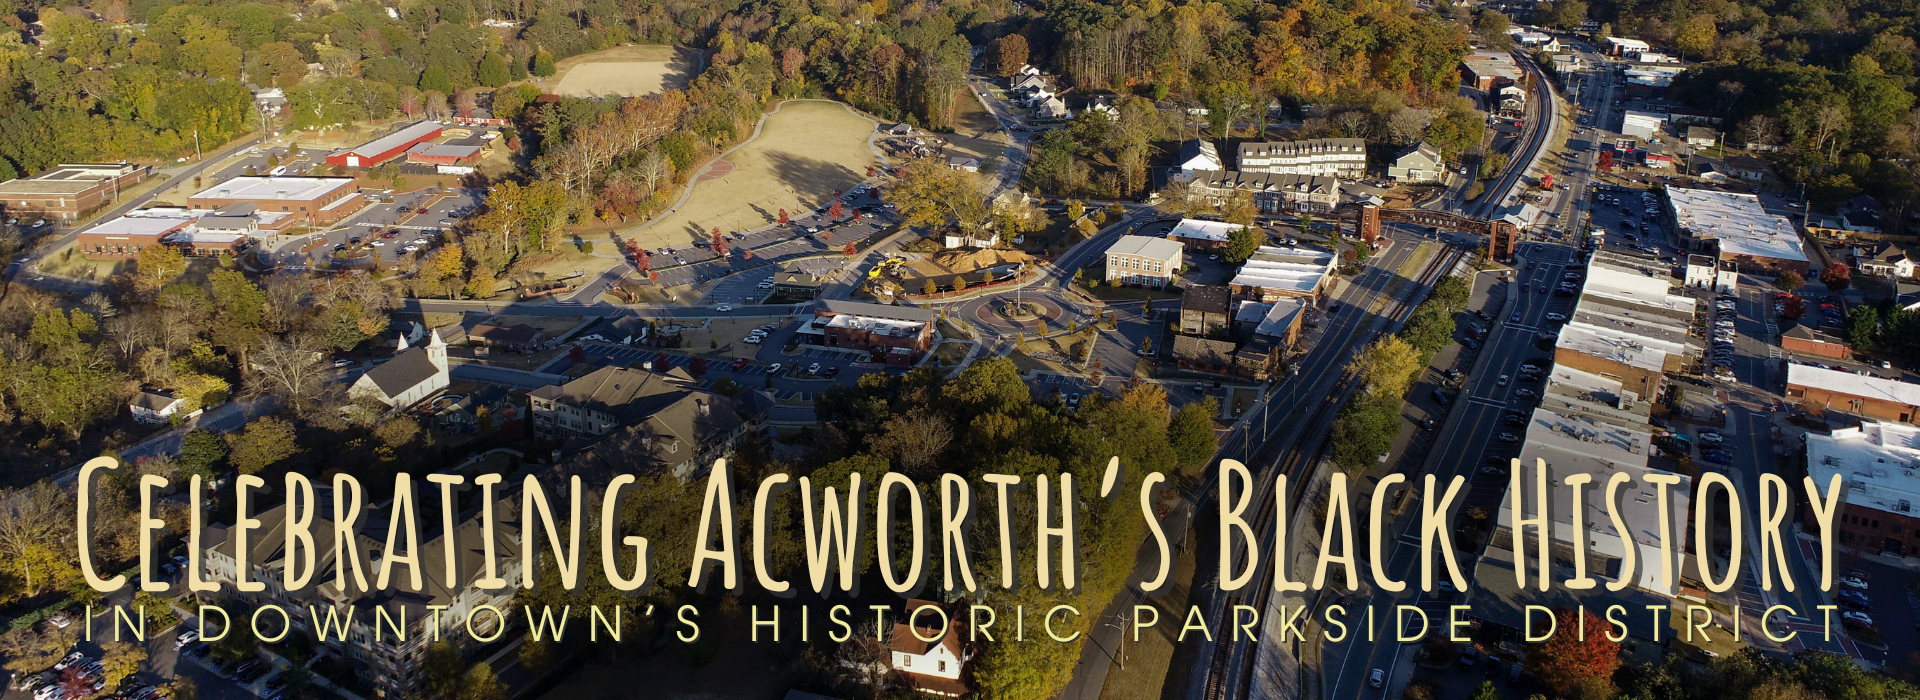 Image Downtown Acworth Aerial